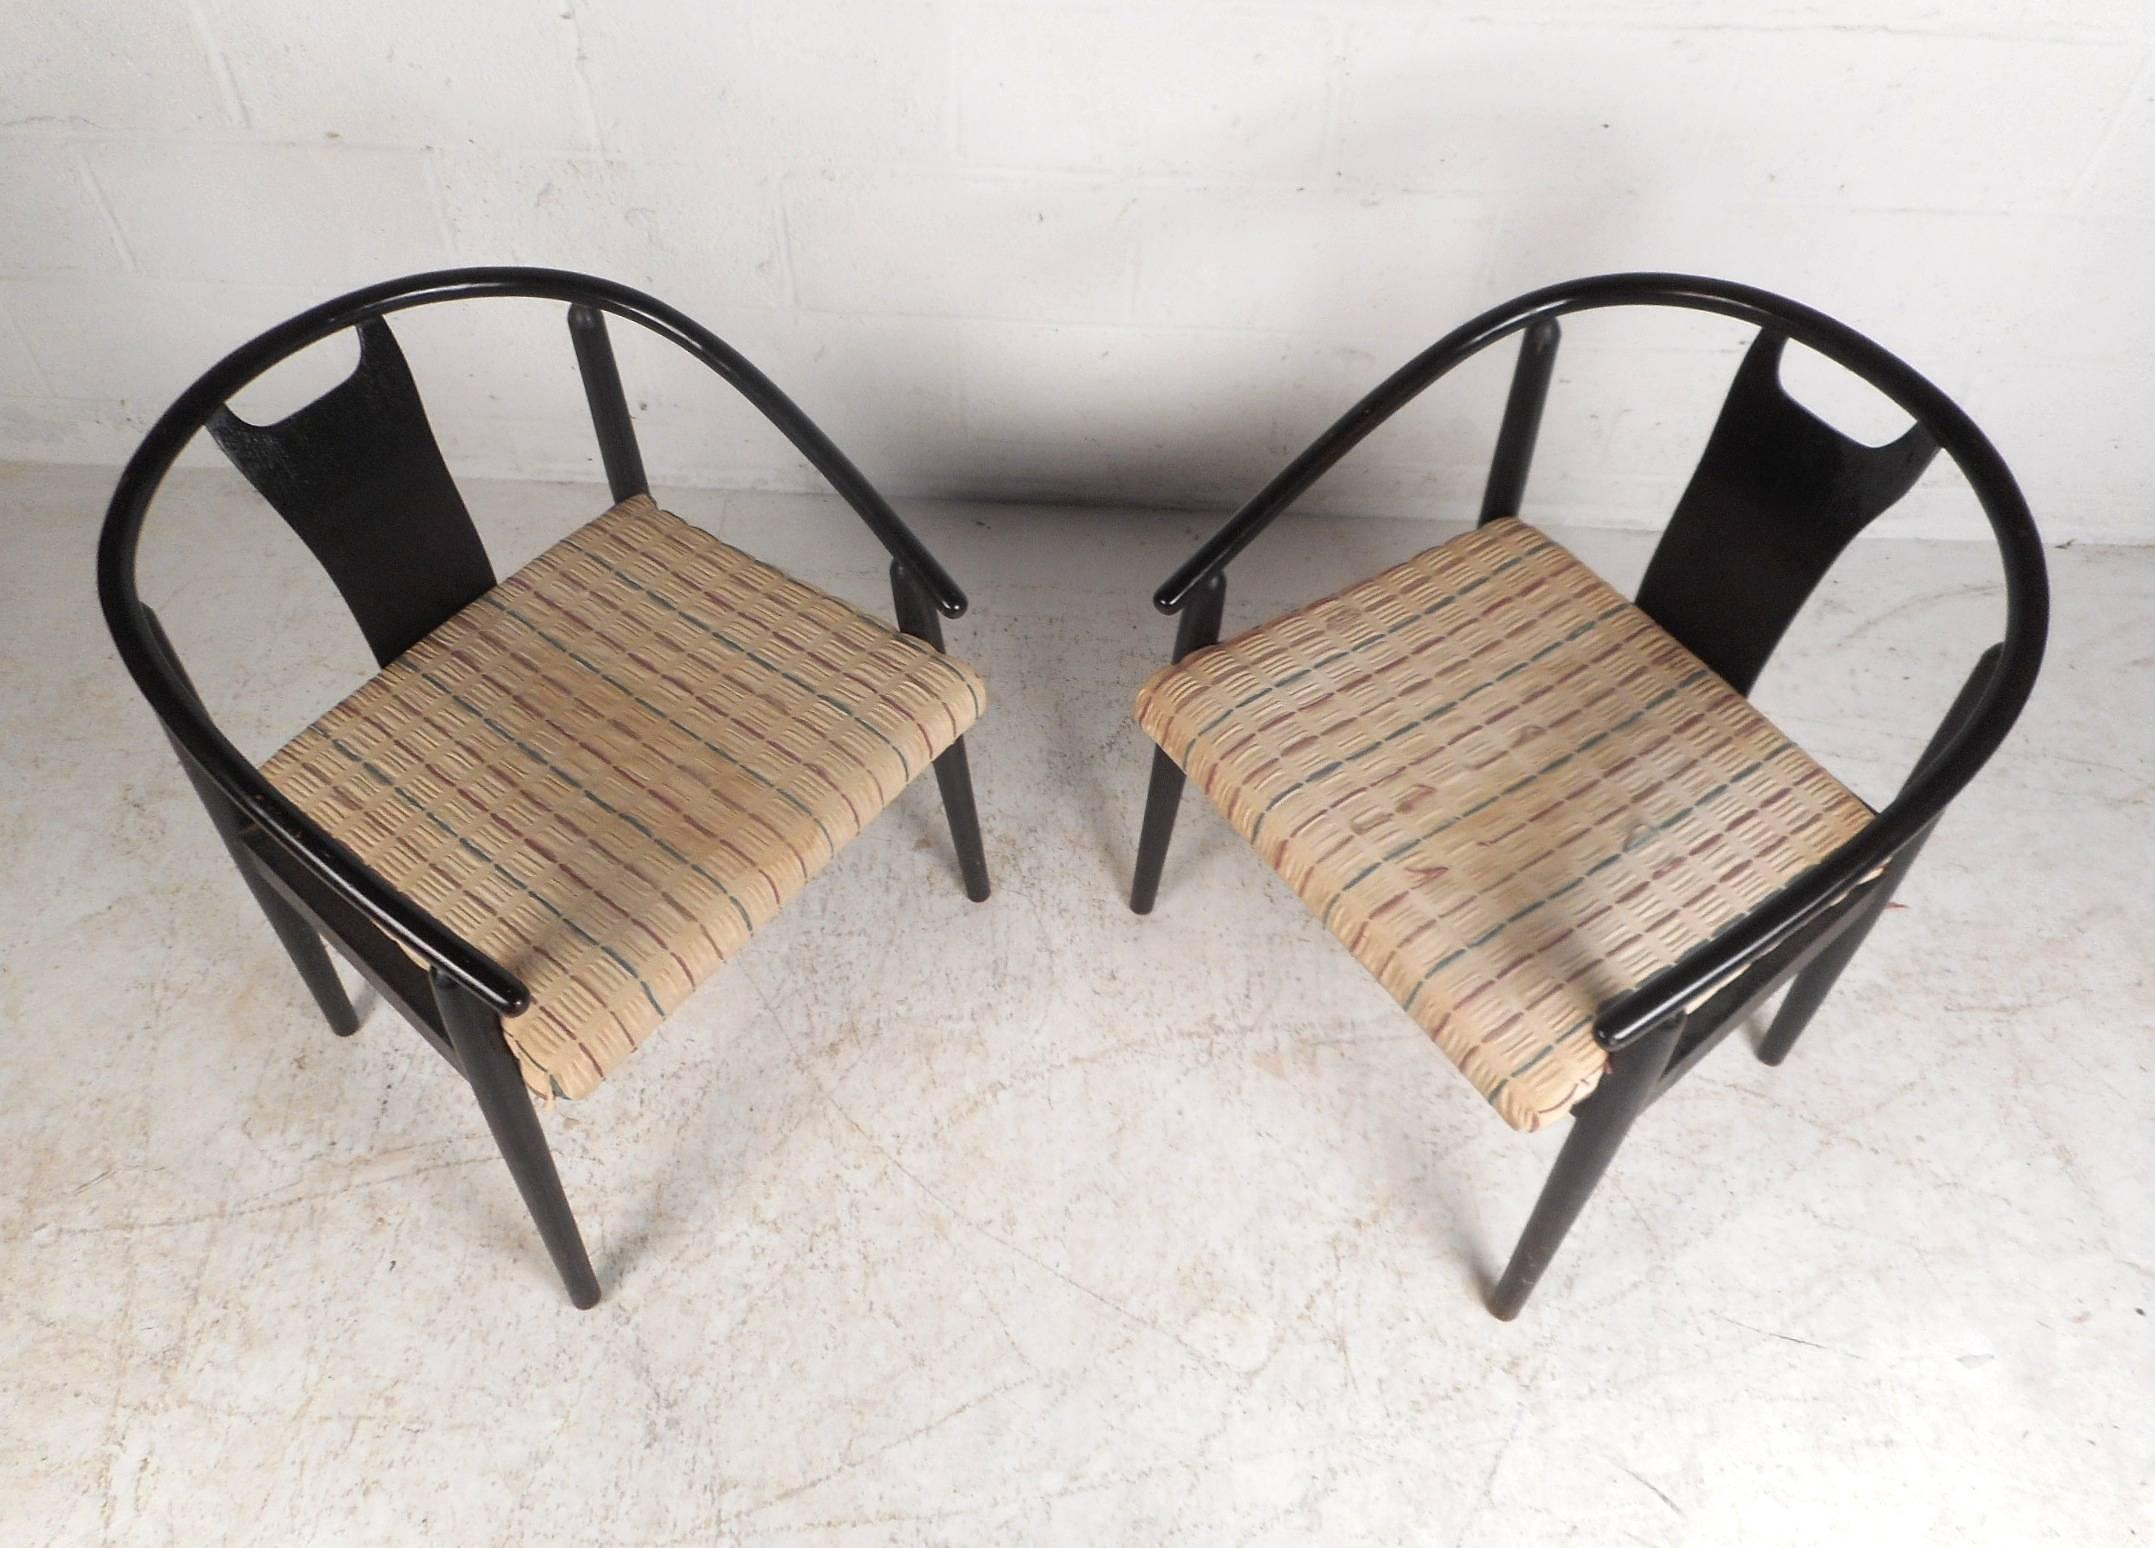 Amazing pair of vintage modern dining chairs with sloping arm rests and a black painted wood frame. Unique design has a barrel back rest with a sculpted centre support and thick padded seating for maximum comfort. The sturdy cylindrical frame with